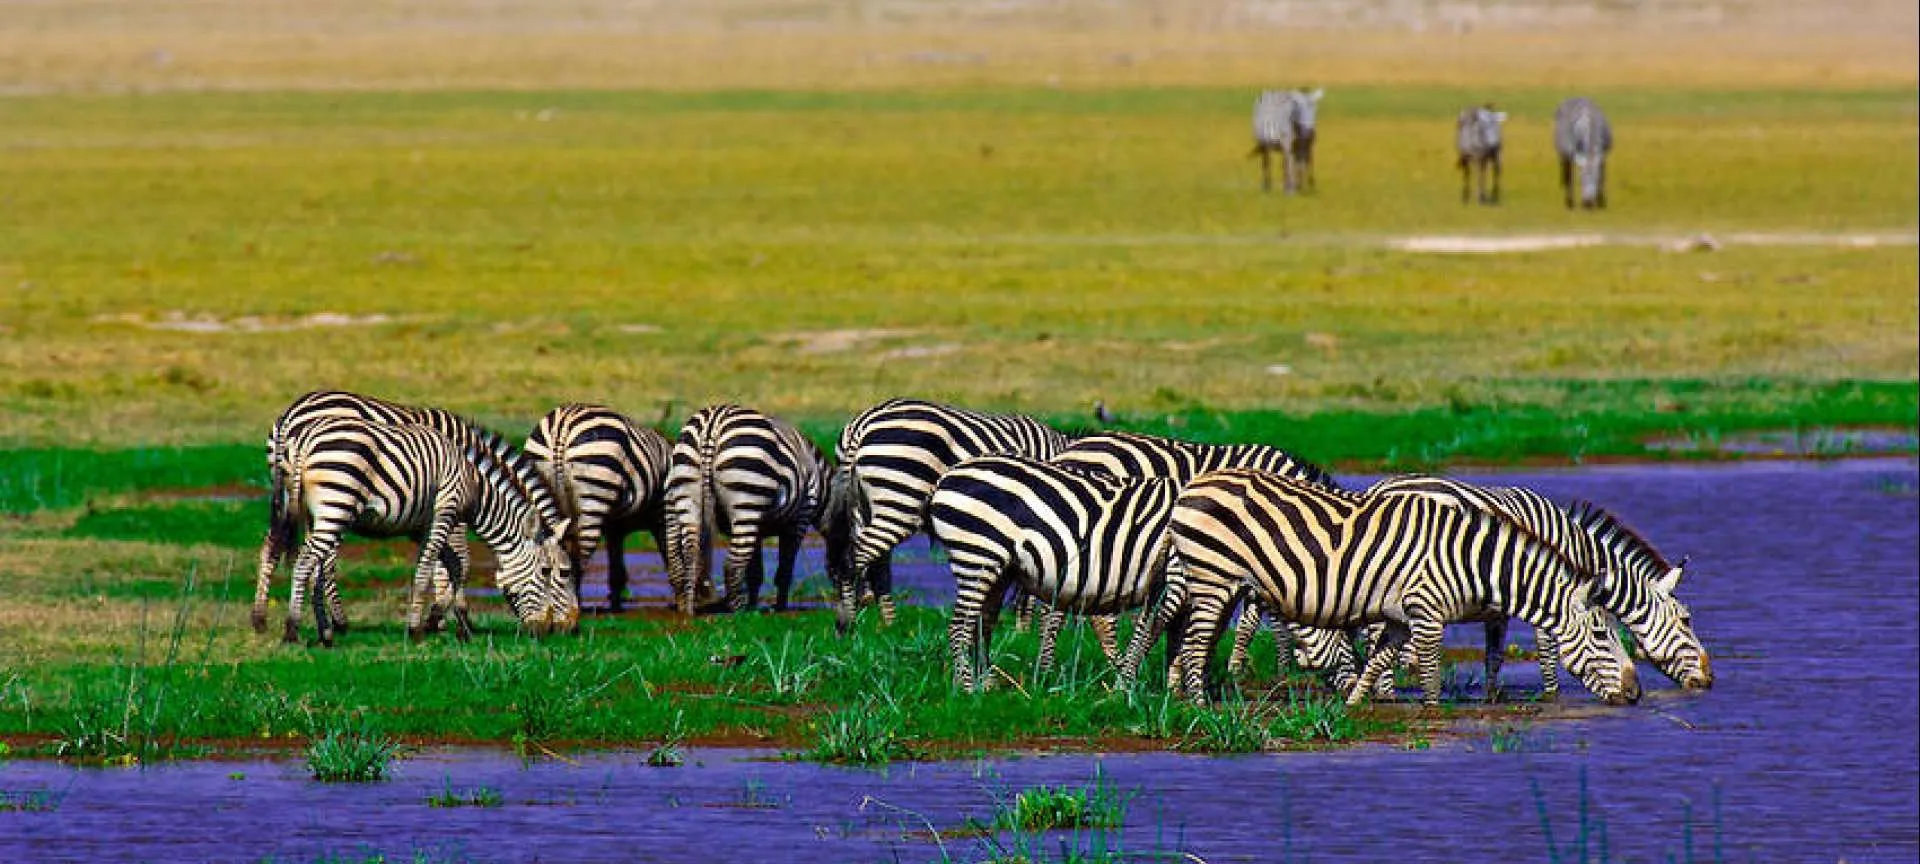 where is amboseli national park located